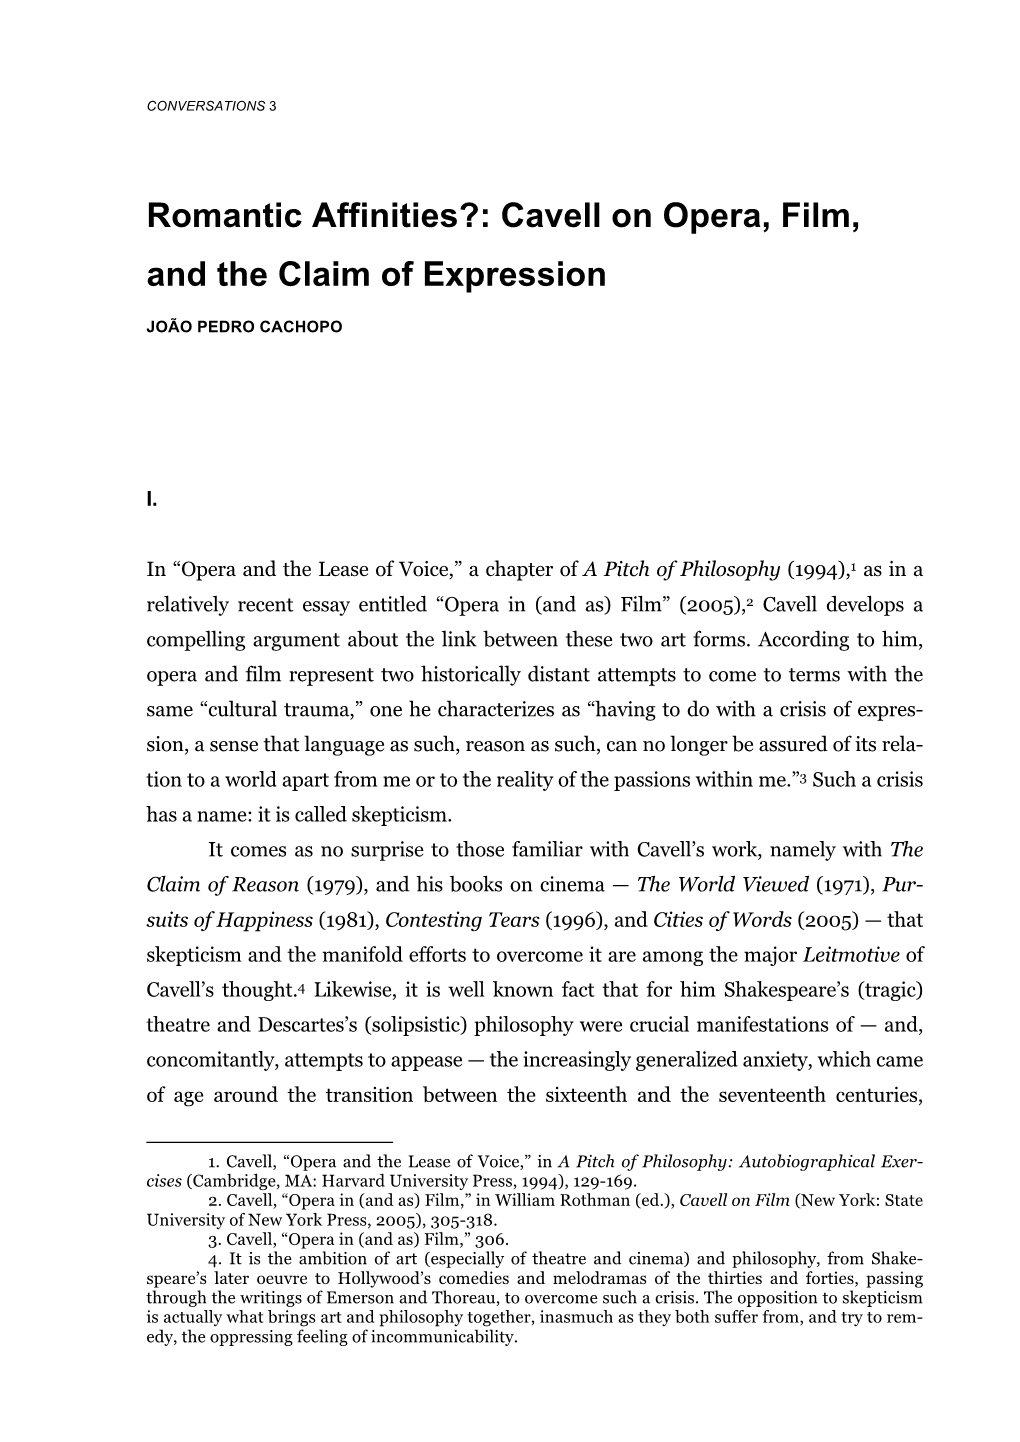 Romantic Affinities?: Cavell on Opera, Film, and the Claim of Expression